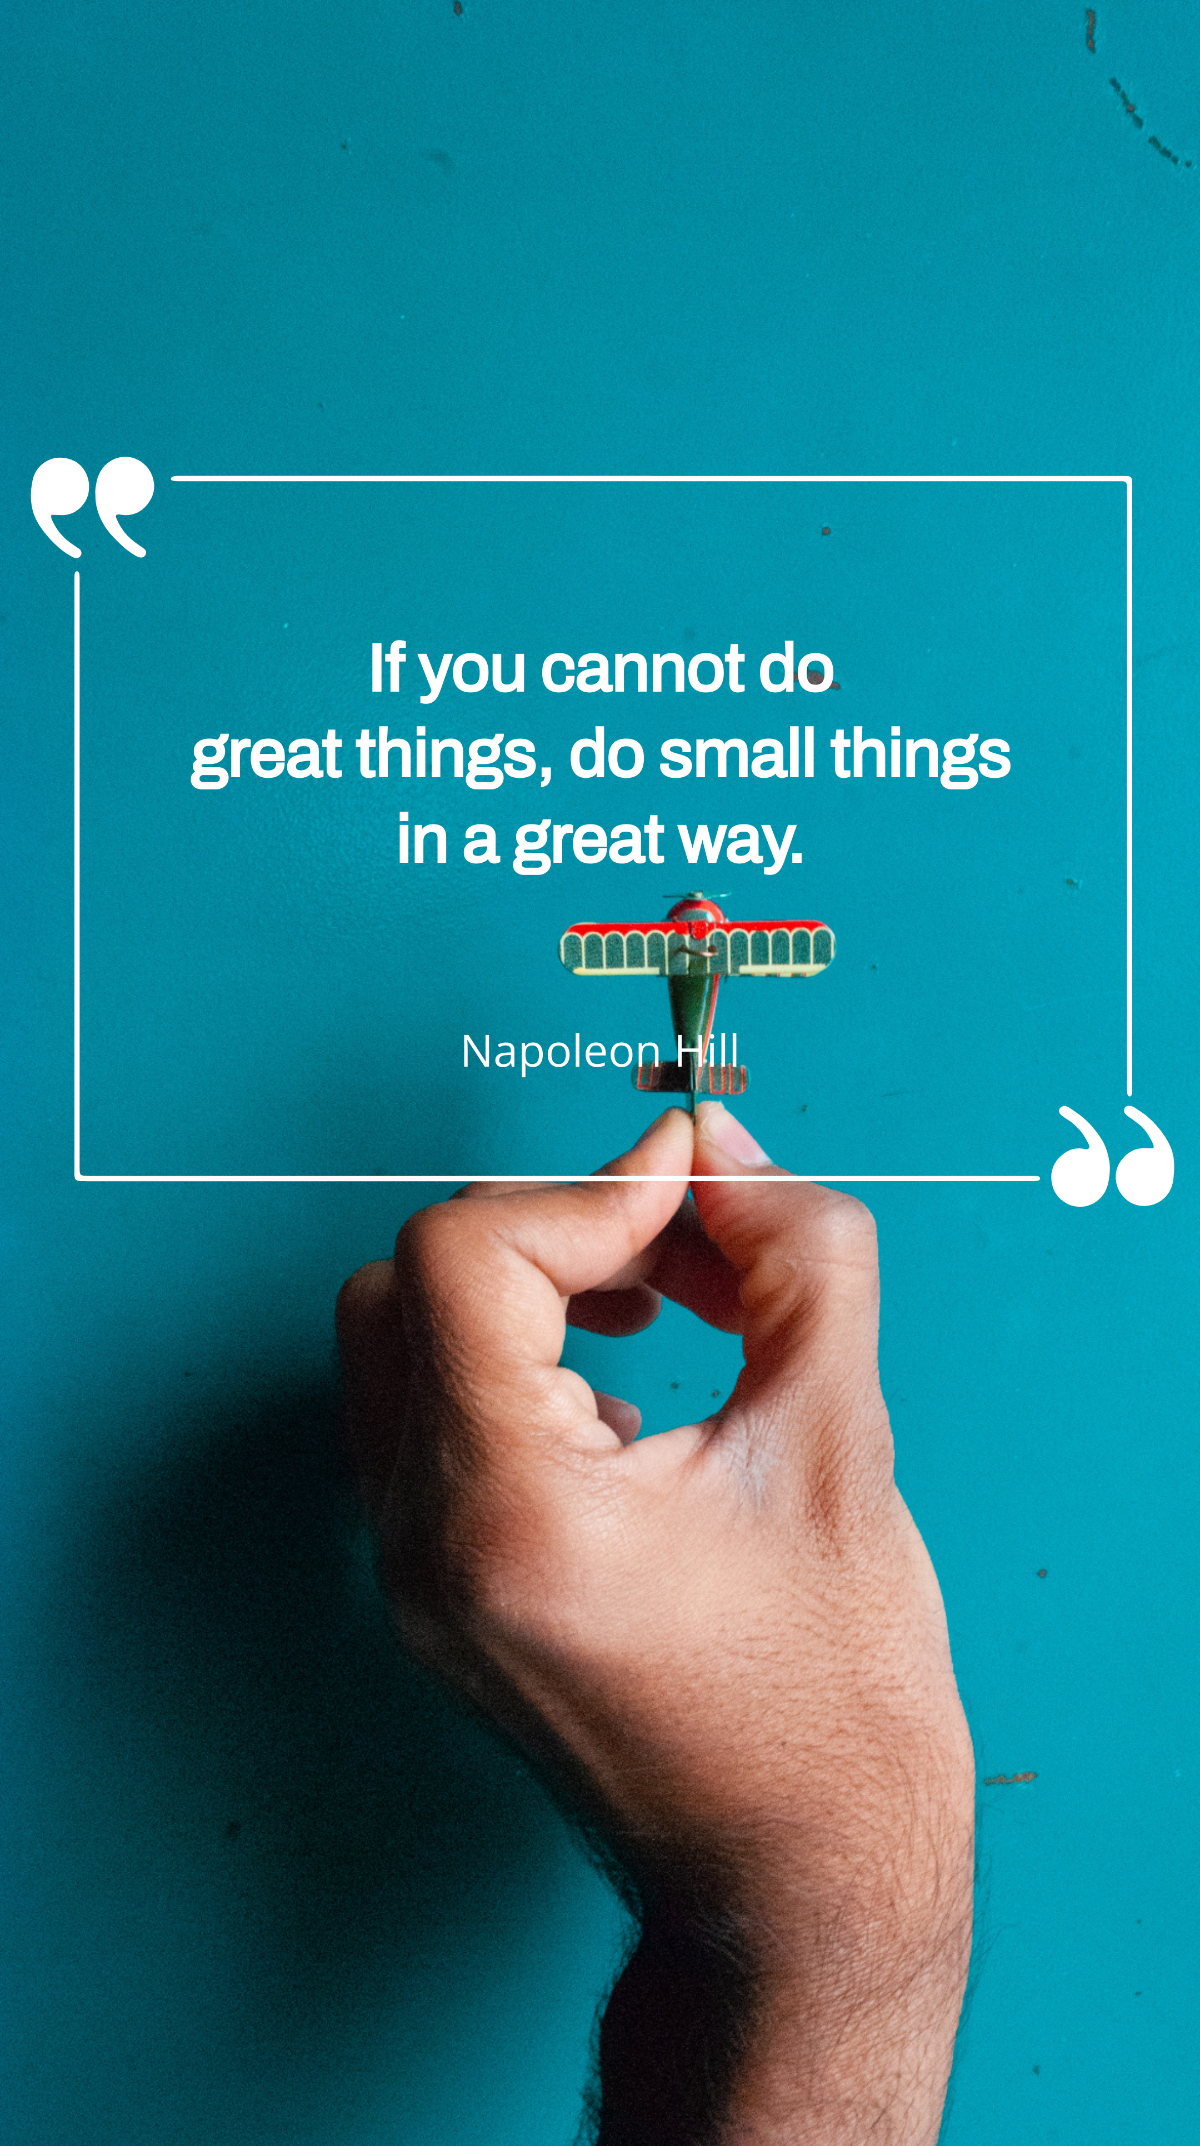 Napoleon Hill  - If you cannot do great things, do small things in a great way Template